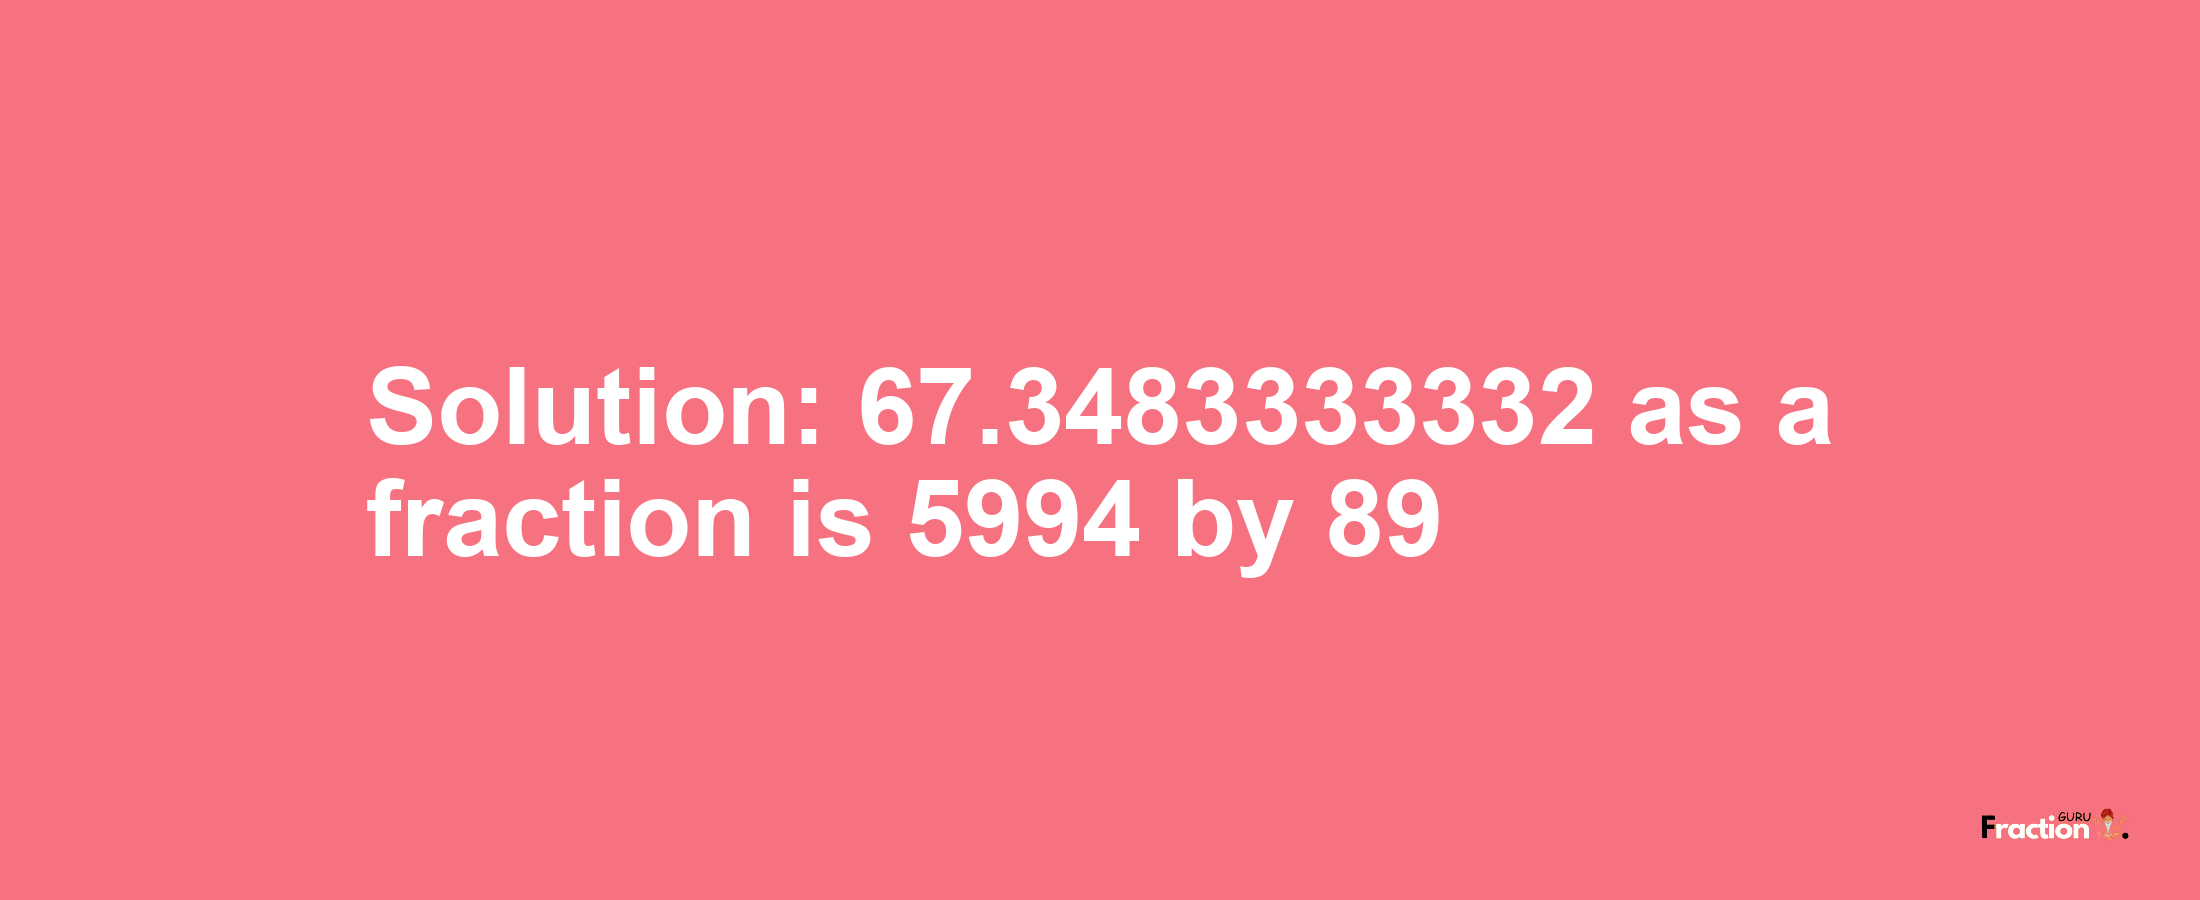 Solution:67.3483333332 as a fraction is 5994/89